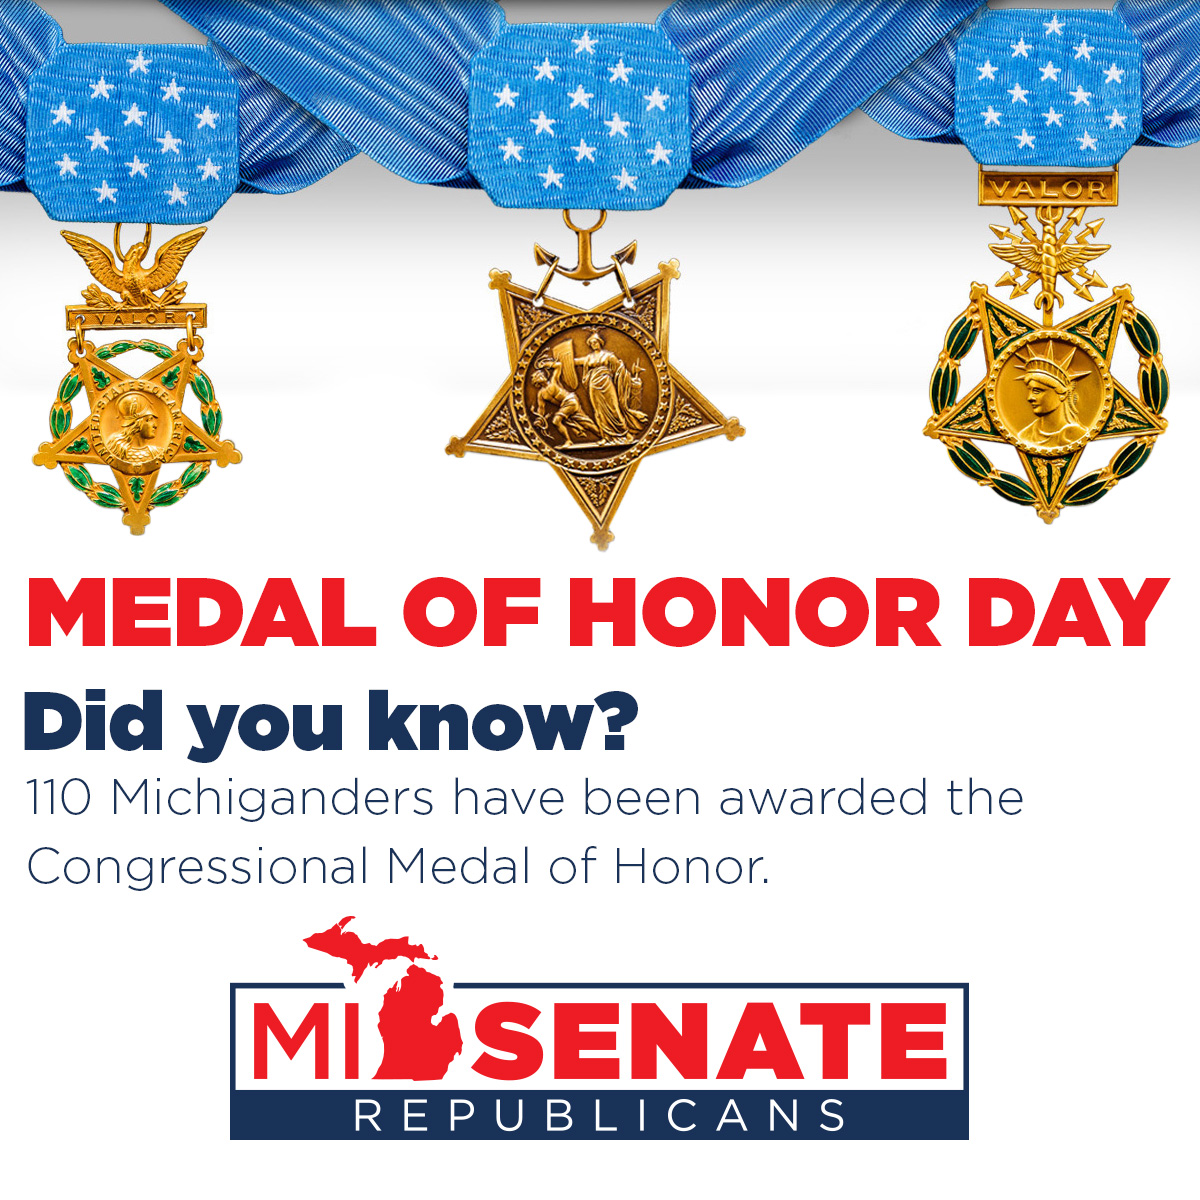 Today is National Medal of Honor Day! Michigan’s own James C. McCloughan was awarded the Medal of Honor in 2017. 110 Michiganders have received the Medal of Honor.